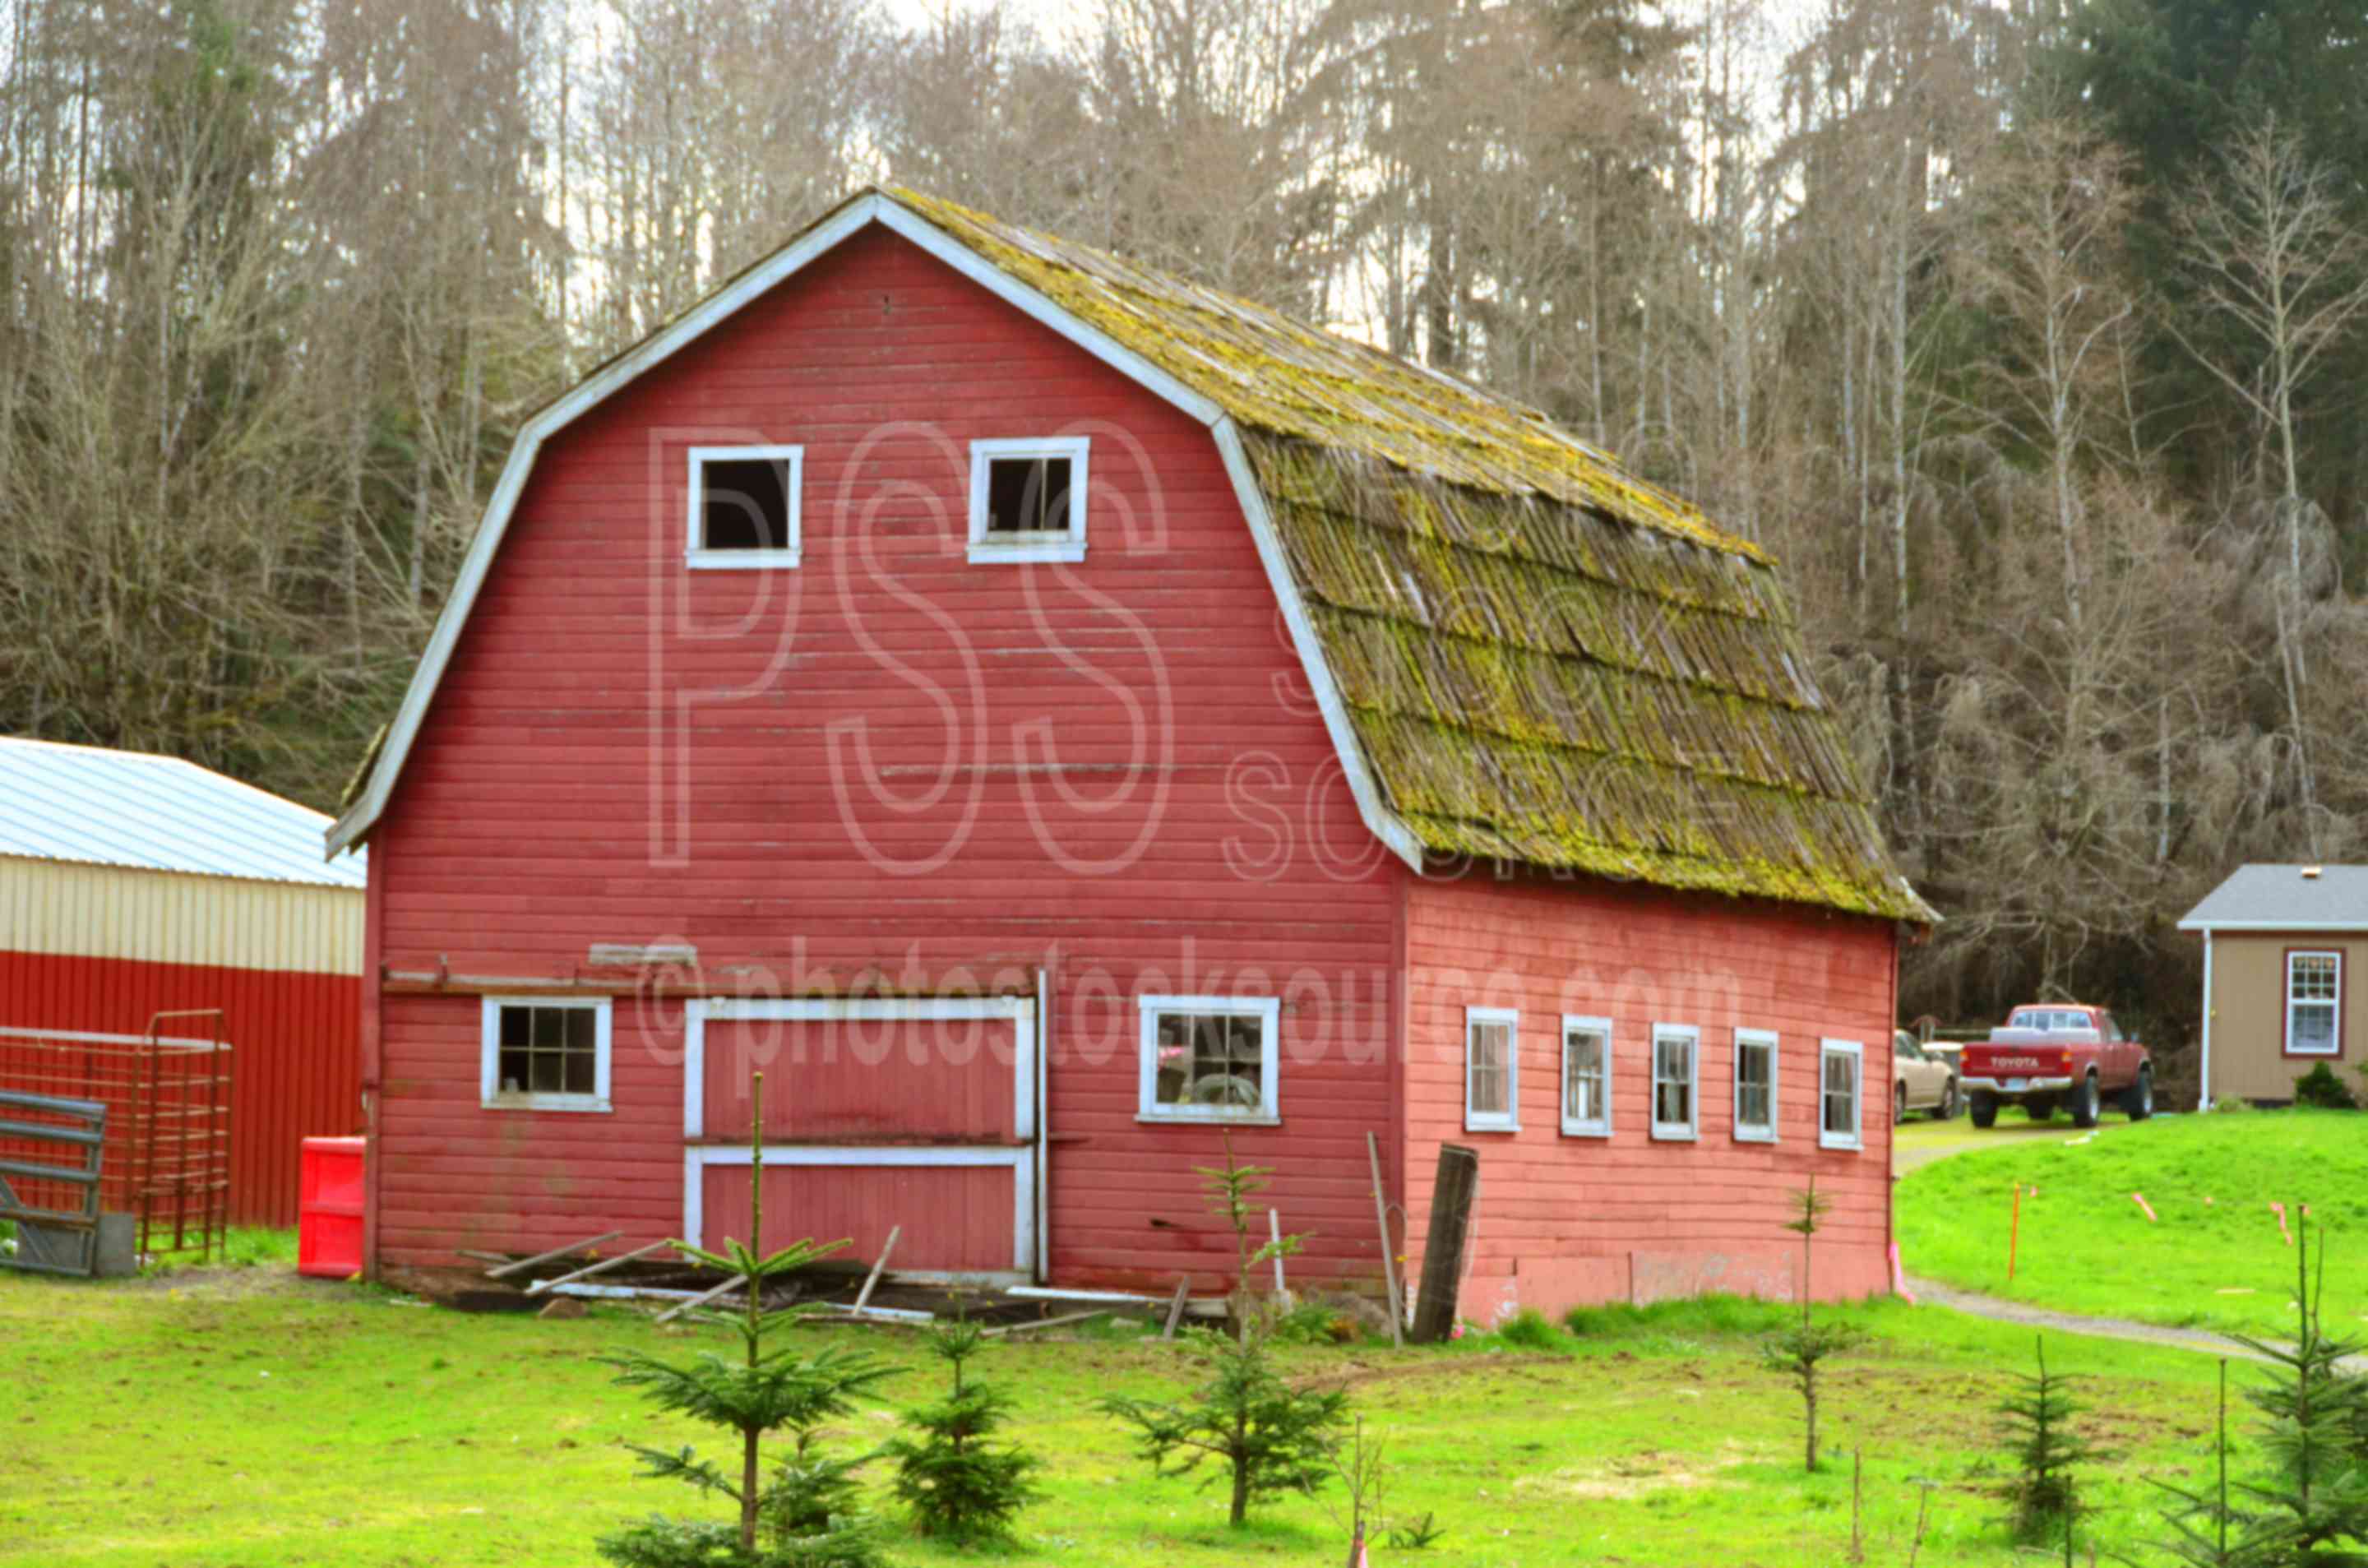 Mossy Red Barn,barn,rural,farm,red,moss,moss covered